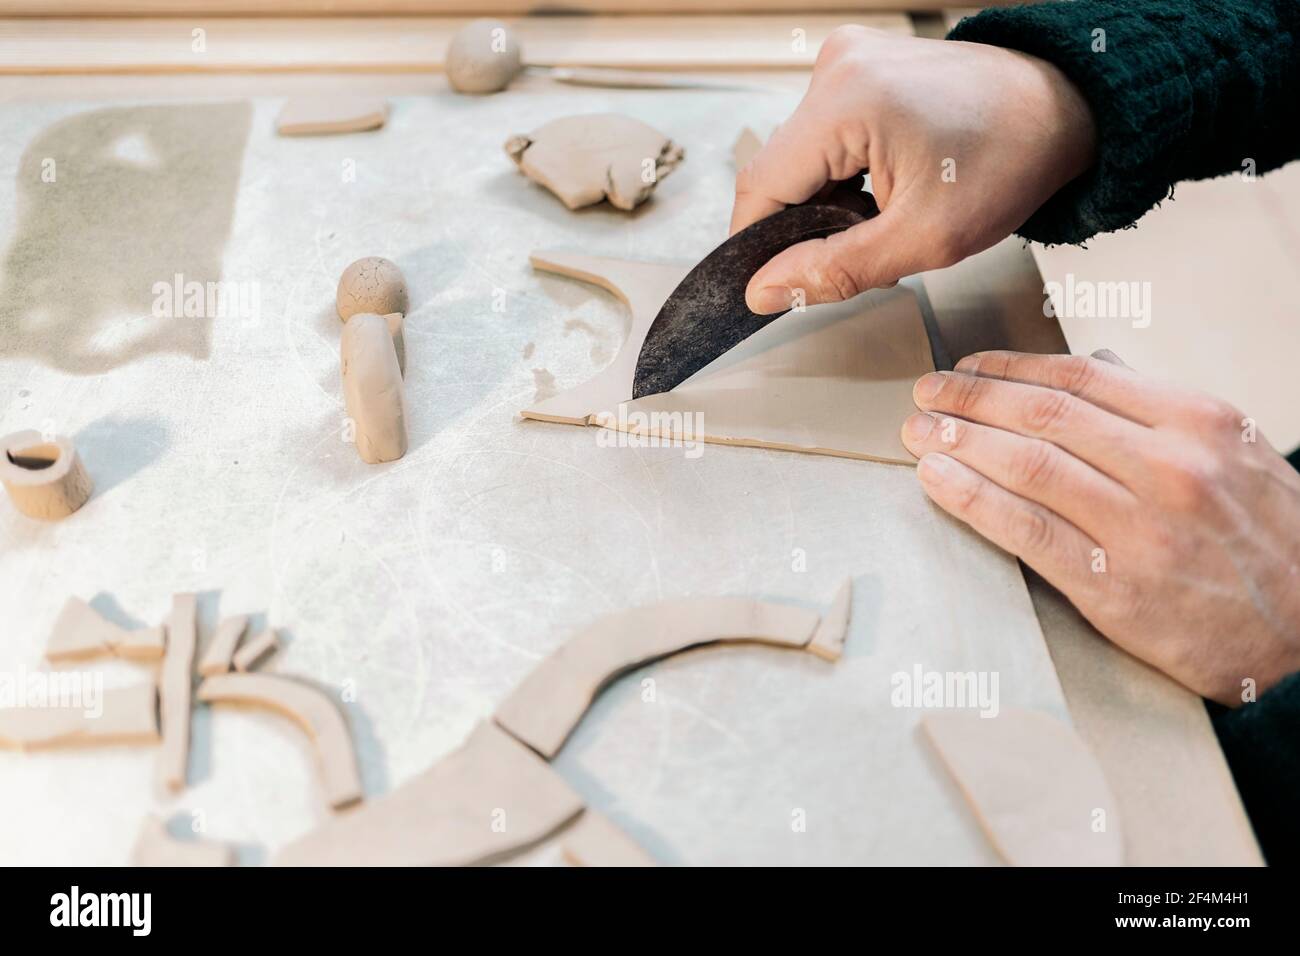 Stock photo of unrecognized person shaping clay in pottery class. Stock Photo